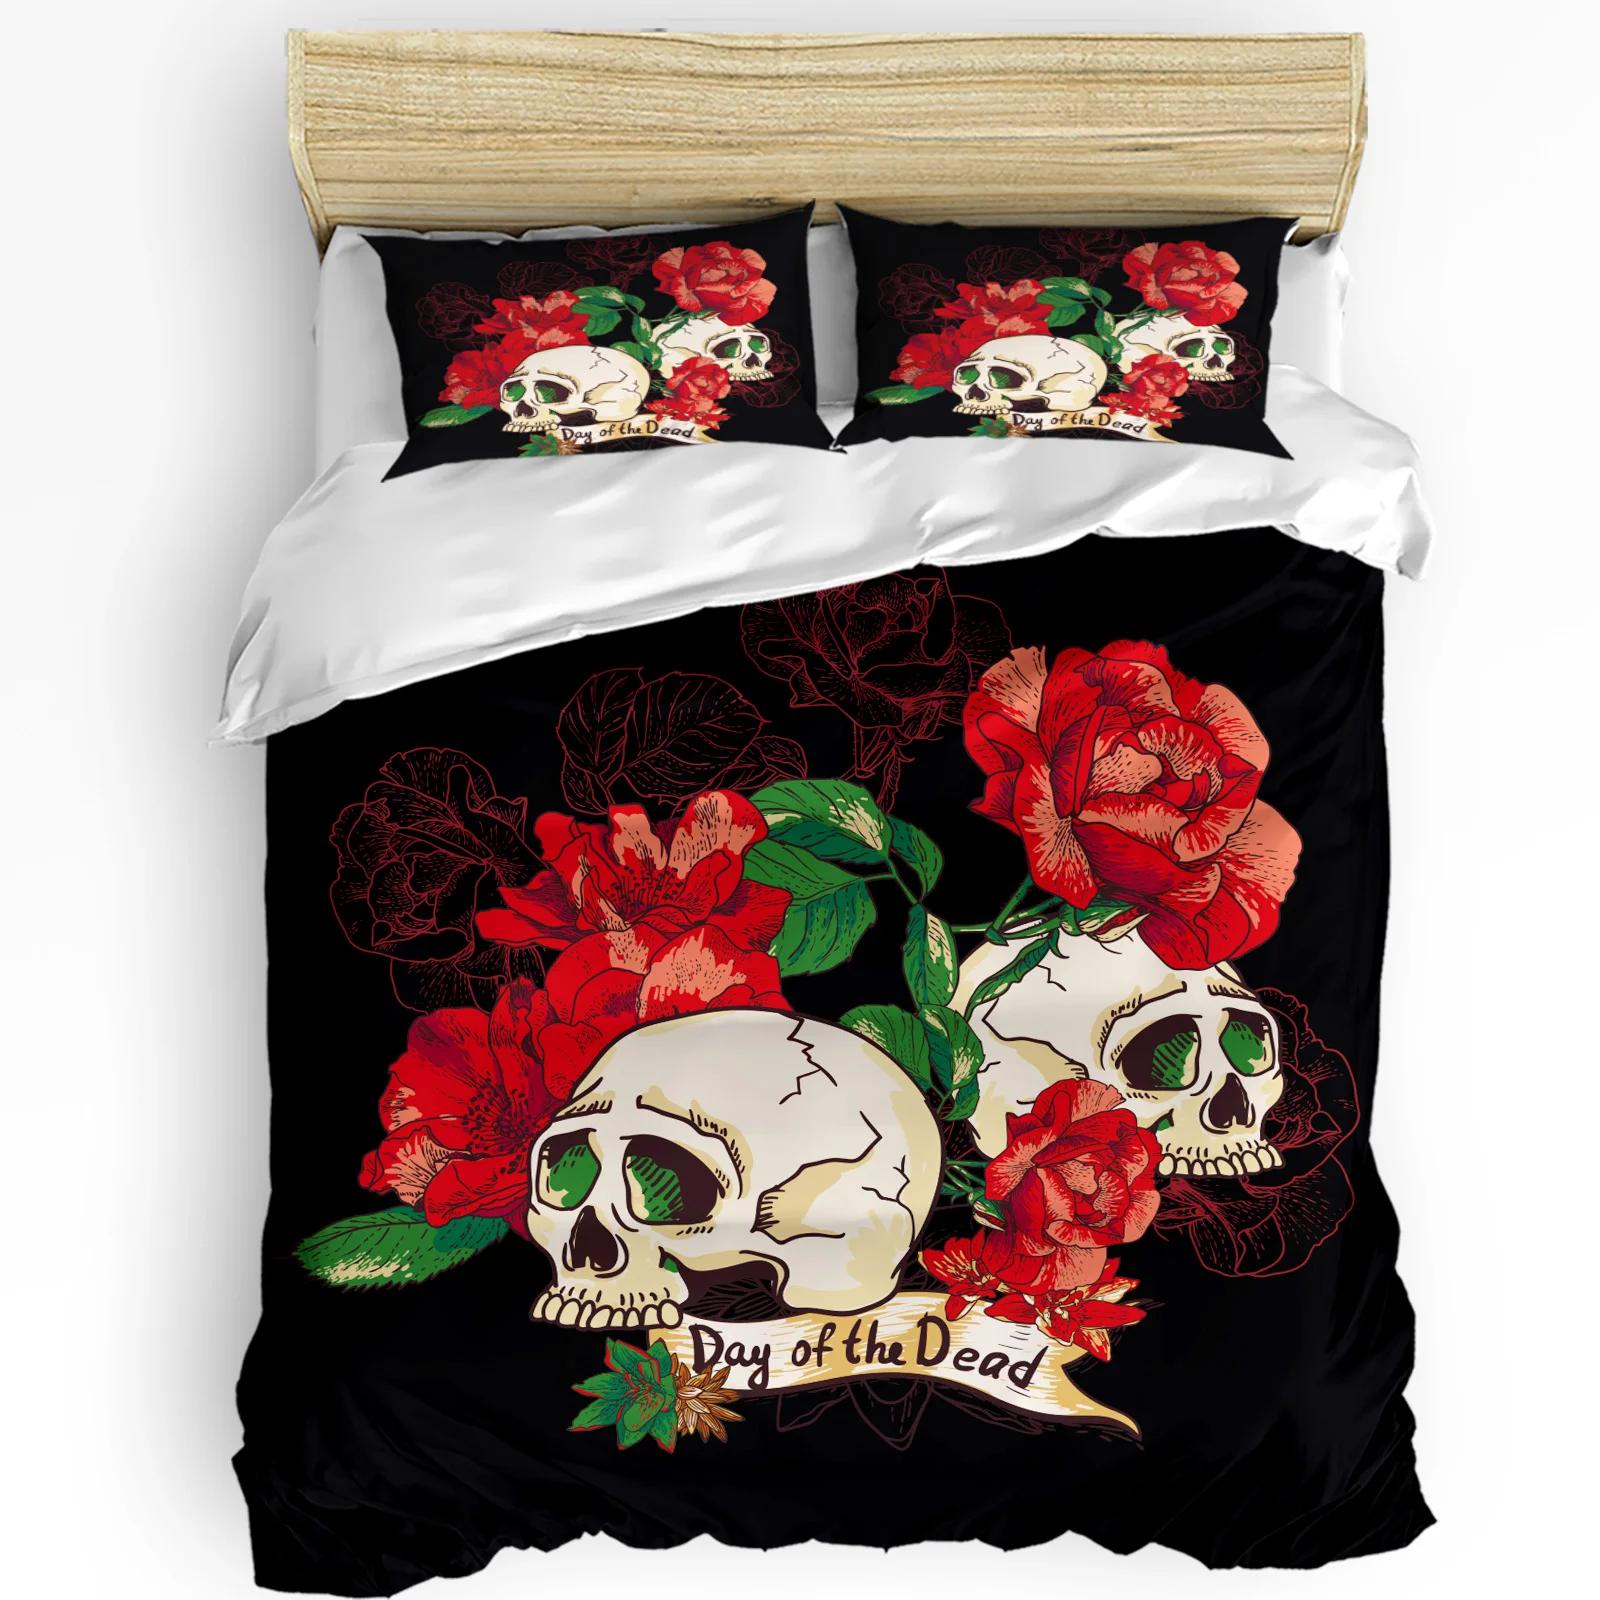 Red Rose Mexico Skull Bedding Set 3pcs Boys Girls Duvet Cover Pillowcase Kids Adult Quilt Cover Double Bed Set Home